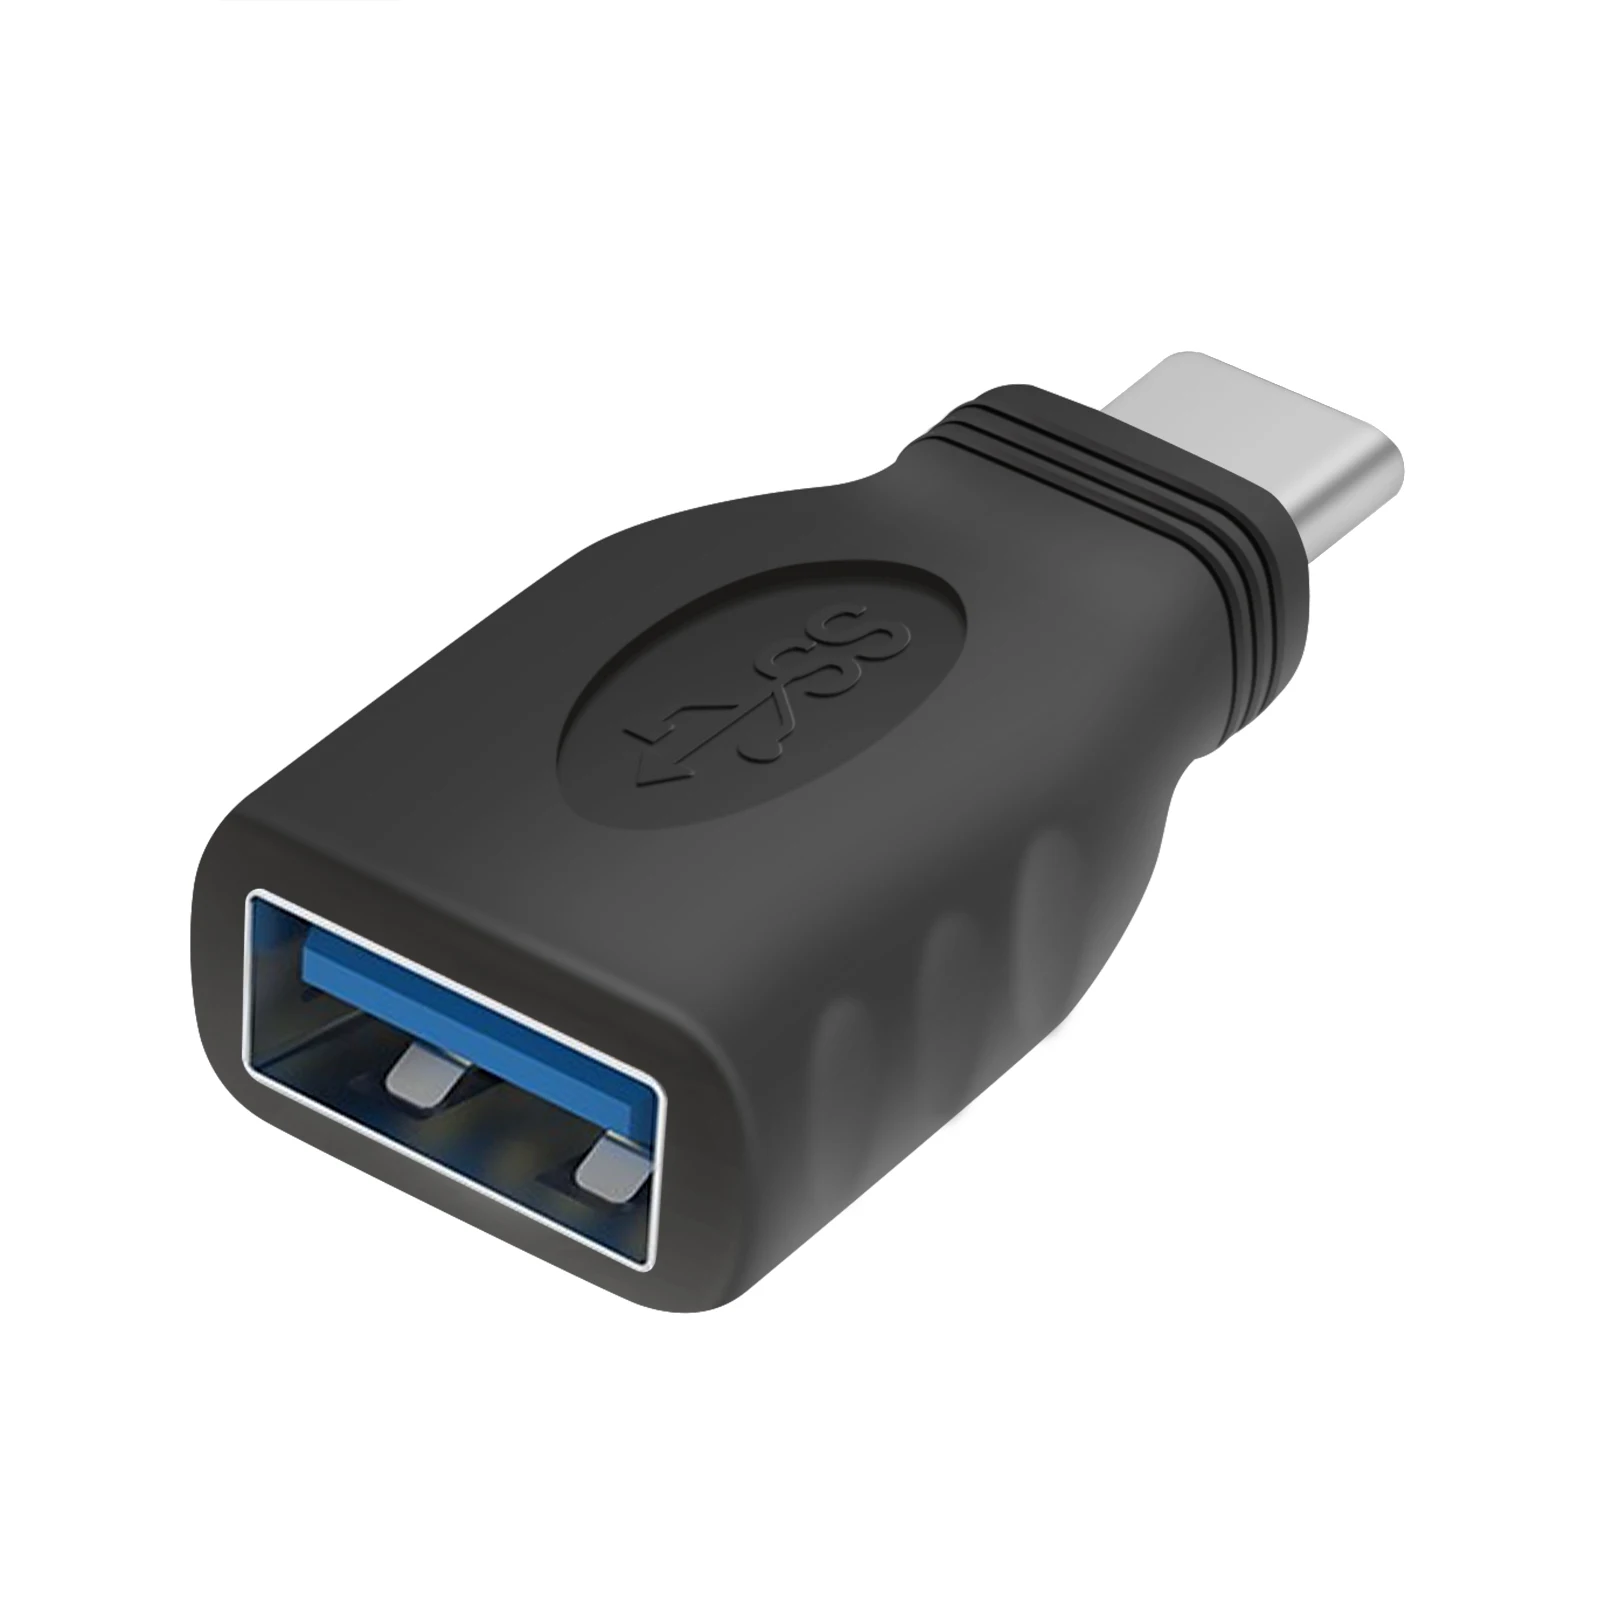 

Media Converter Otg Type C Male To Usb 3.0 Female Usb C Adapter, As customer requires